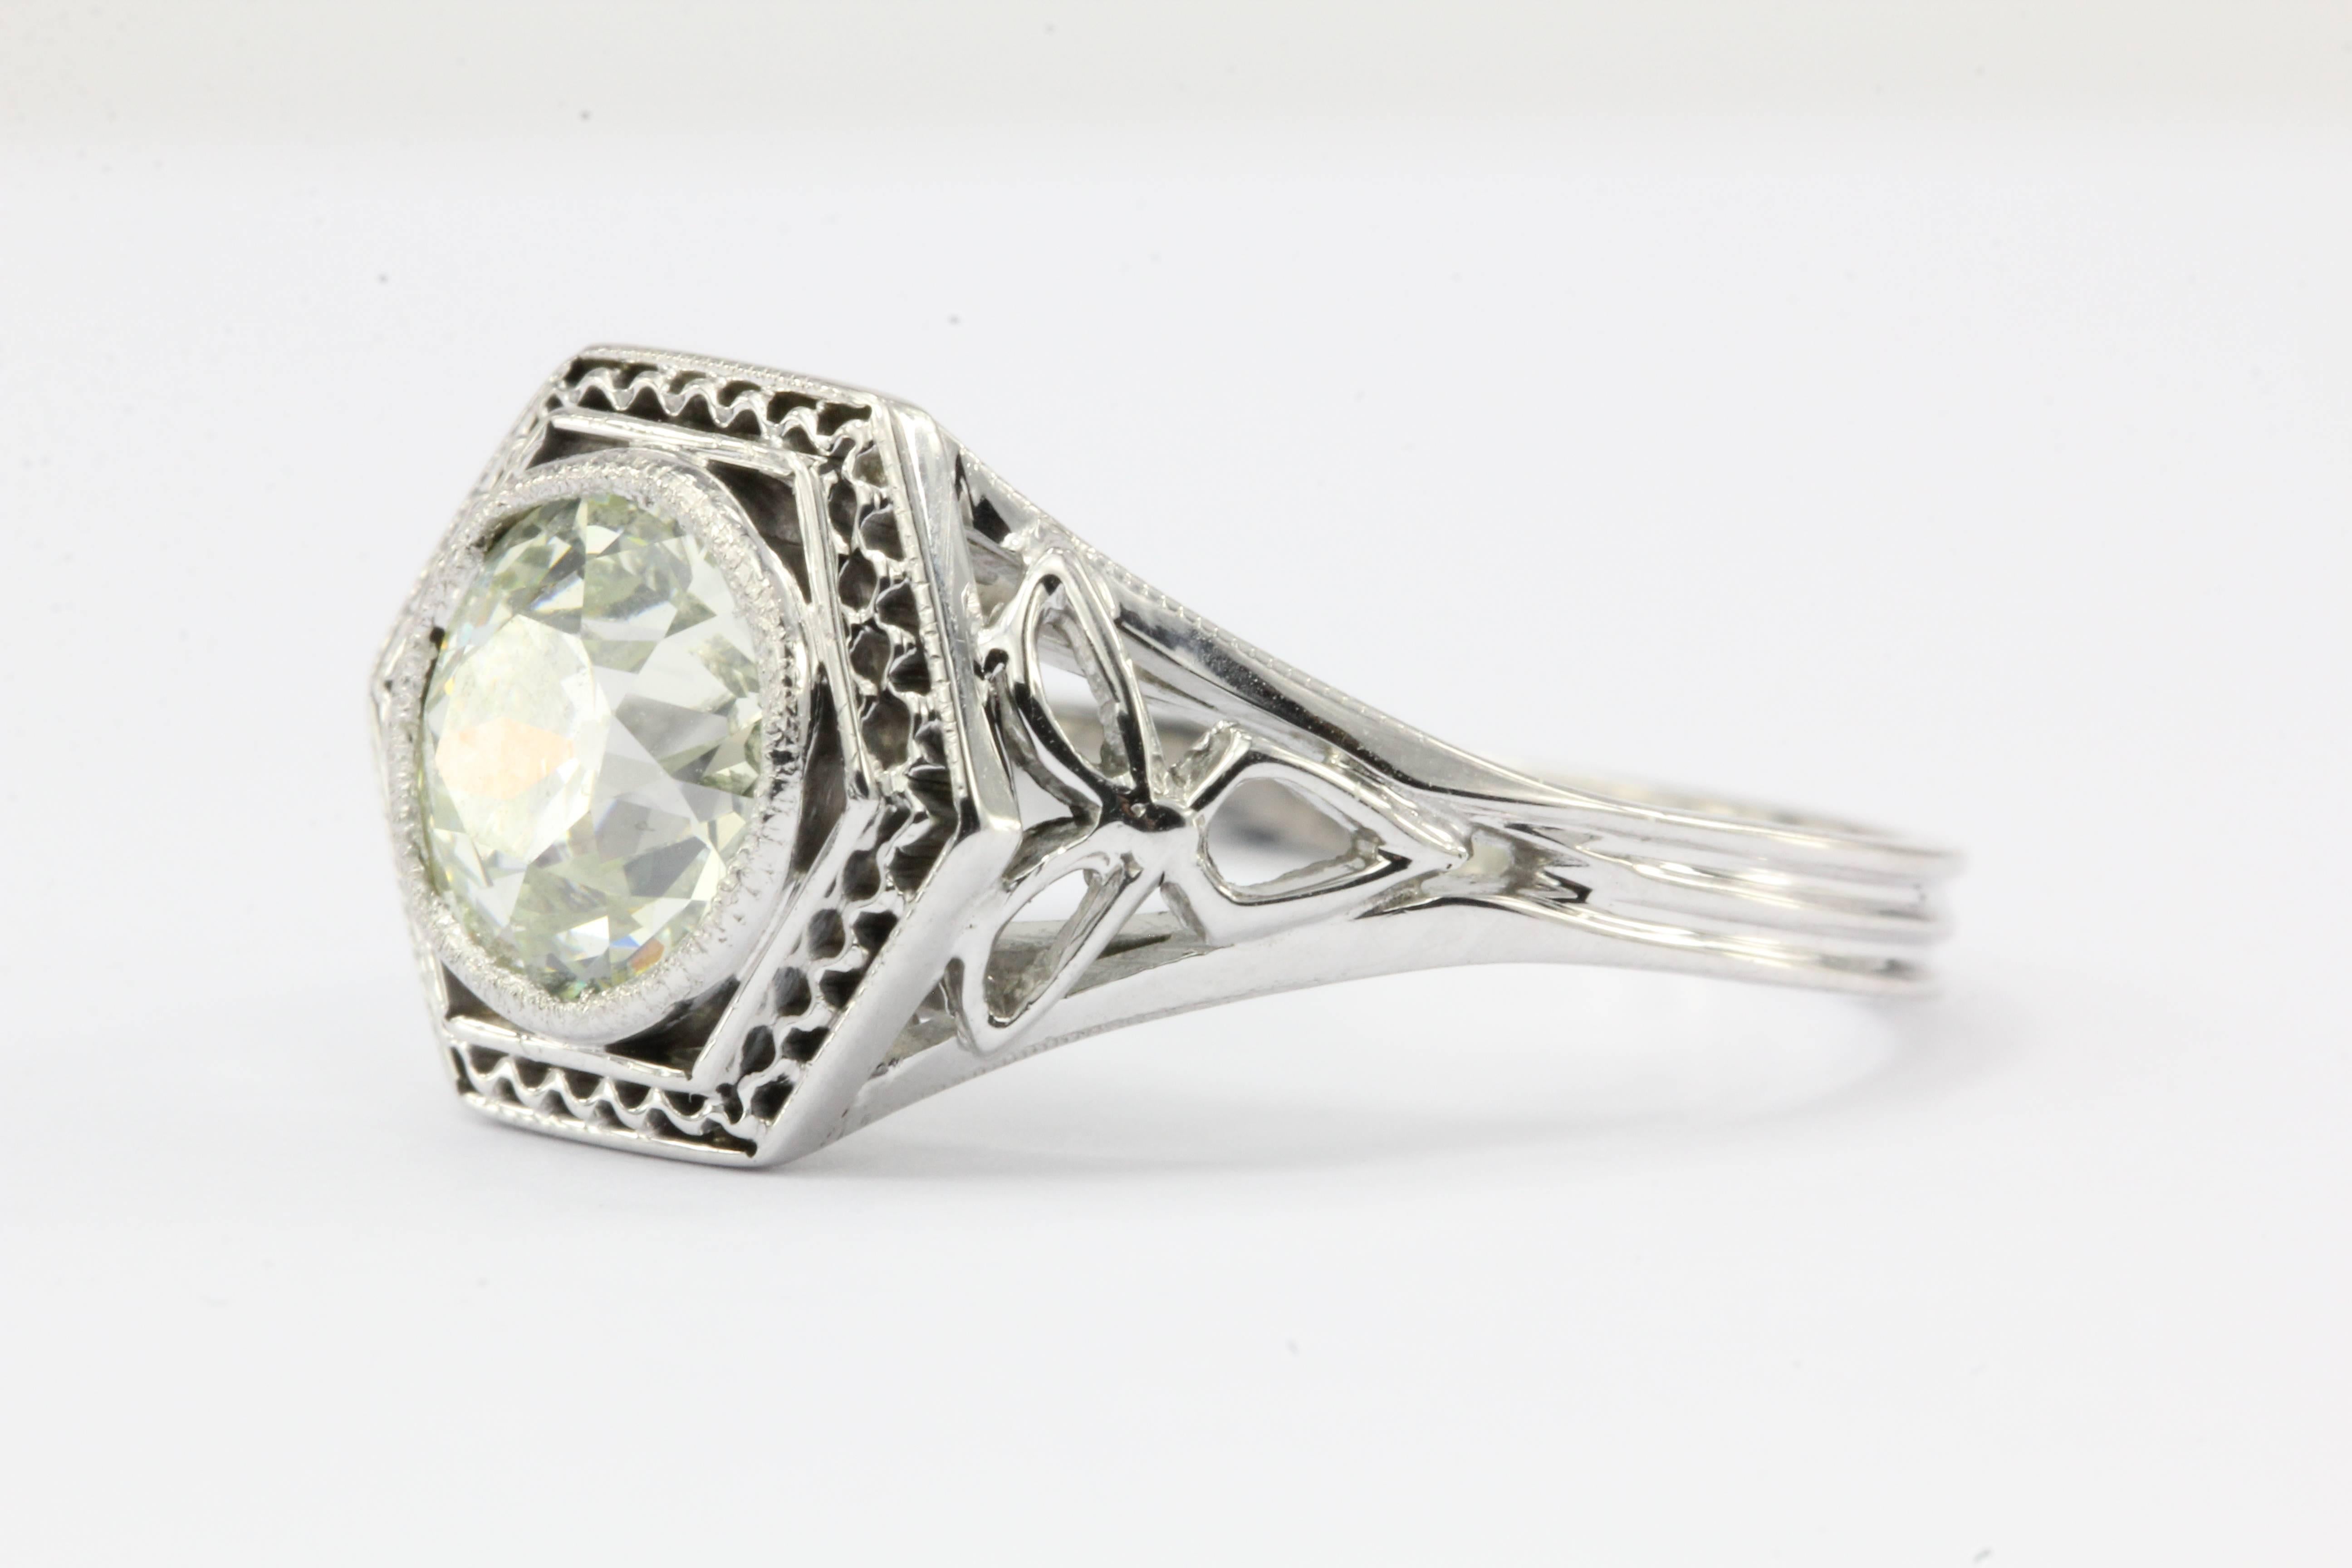 Art Nouveau 18K White Gold 1.49 Carat Fancy Color Old European Diamond Engagement Ring

The fancy light yellow & green old European cut diamond catches the light as a drop of morning dew reflecting the first rays of light from the rising sun on